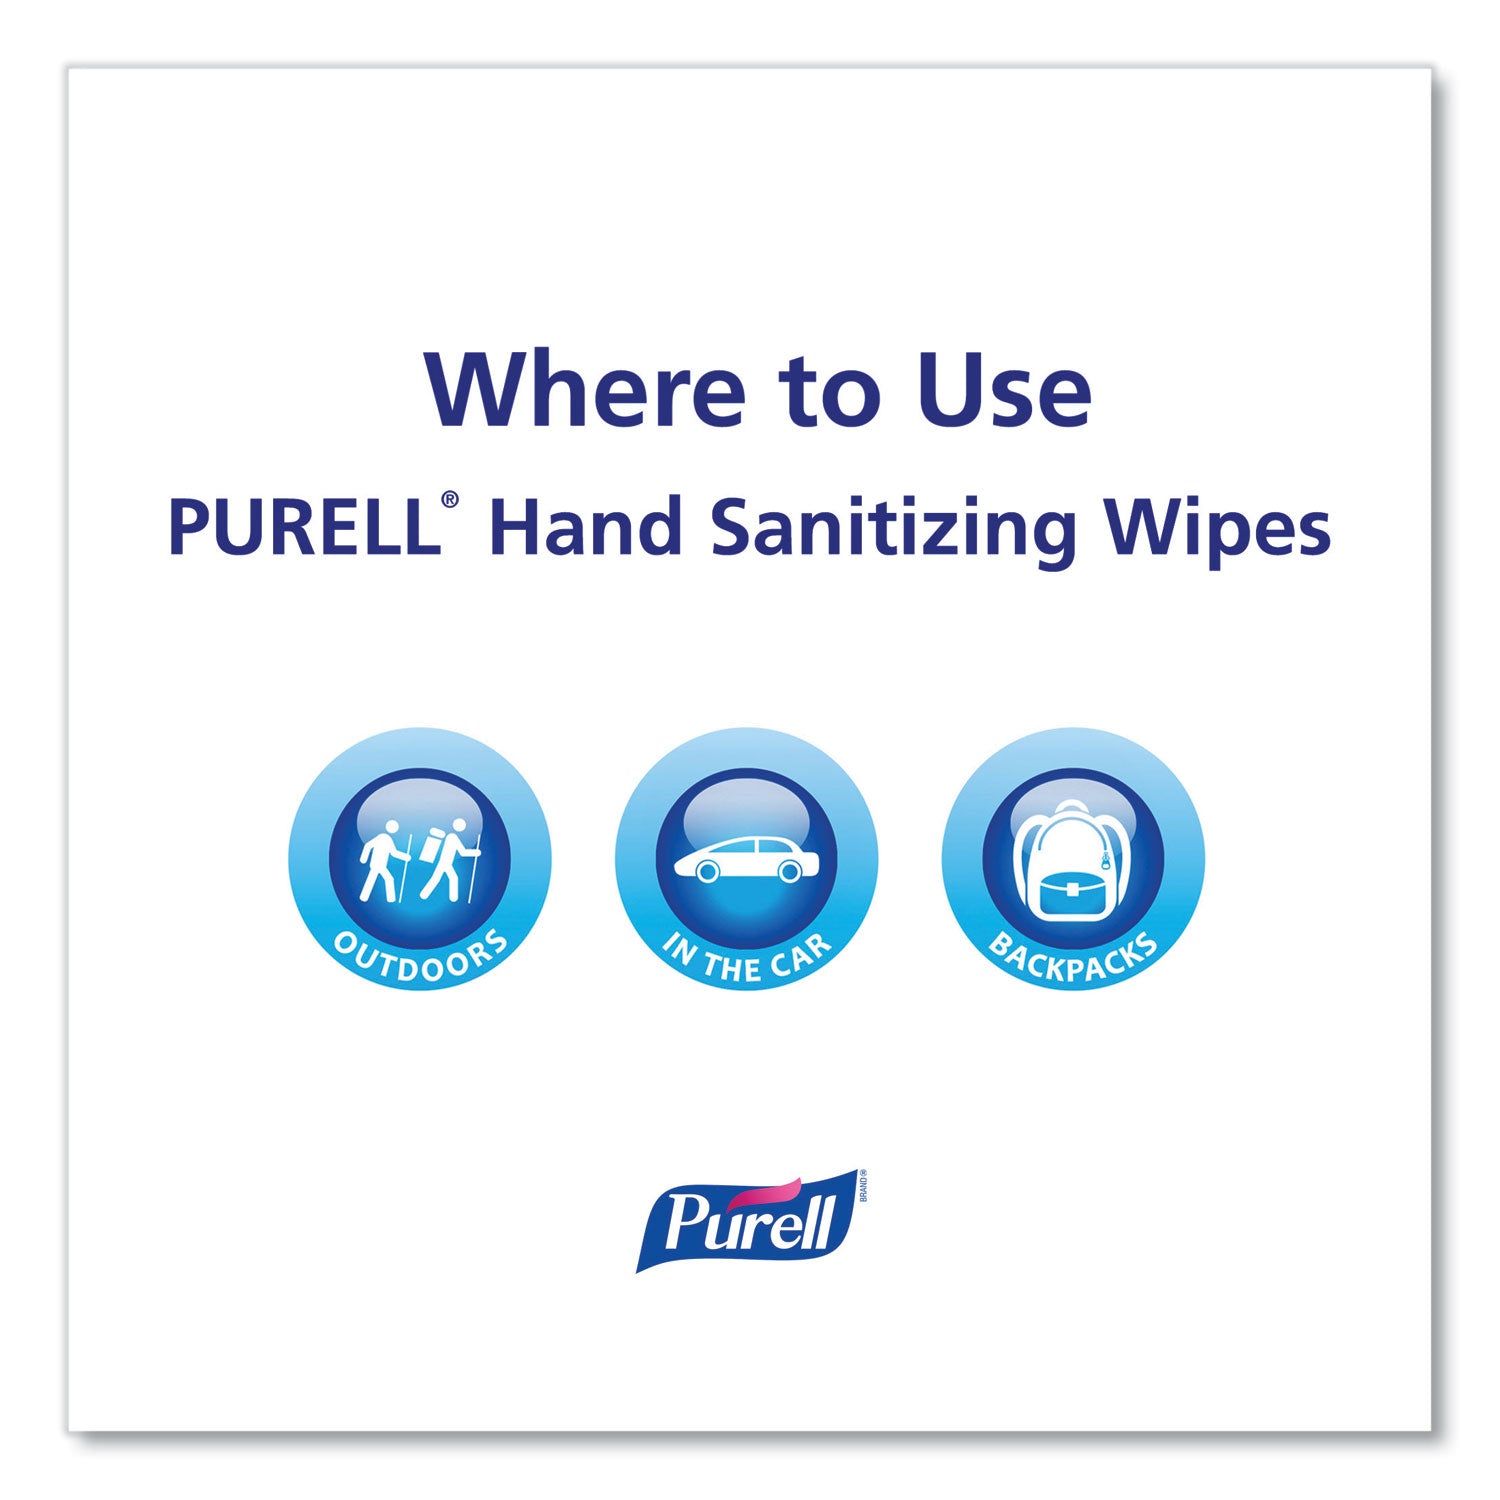 Hand Sanitizing Wipes Alcohol Formula, 6 x 7, Unscented, White, 175/Canister, 6 Canisters/Carton - 